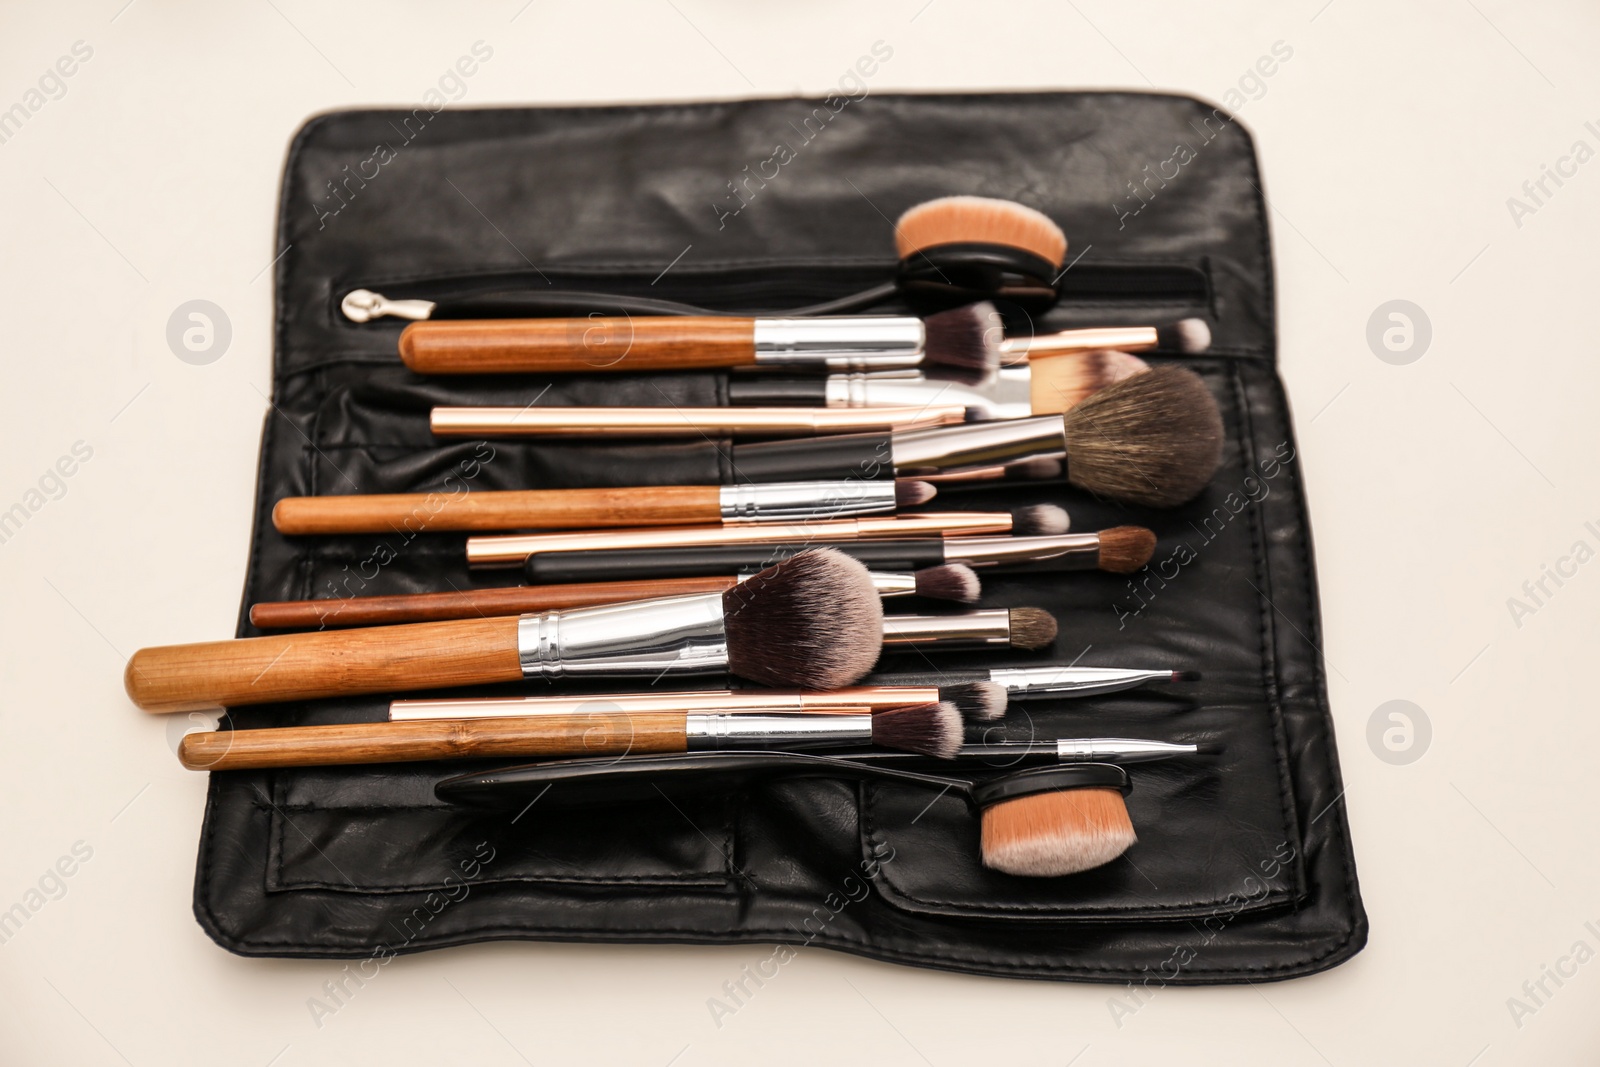 Photo of Organizer full of professional tools on makeup artists workplace